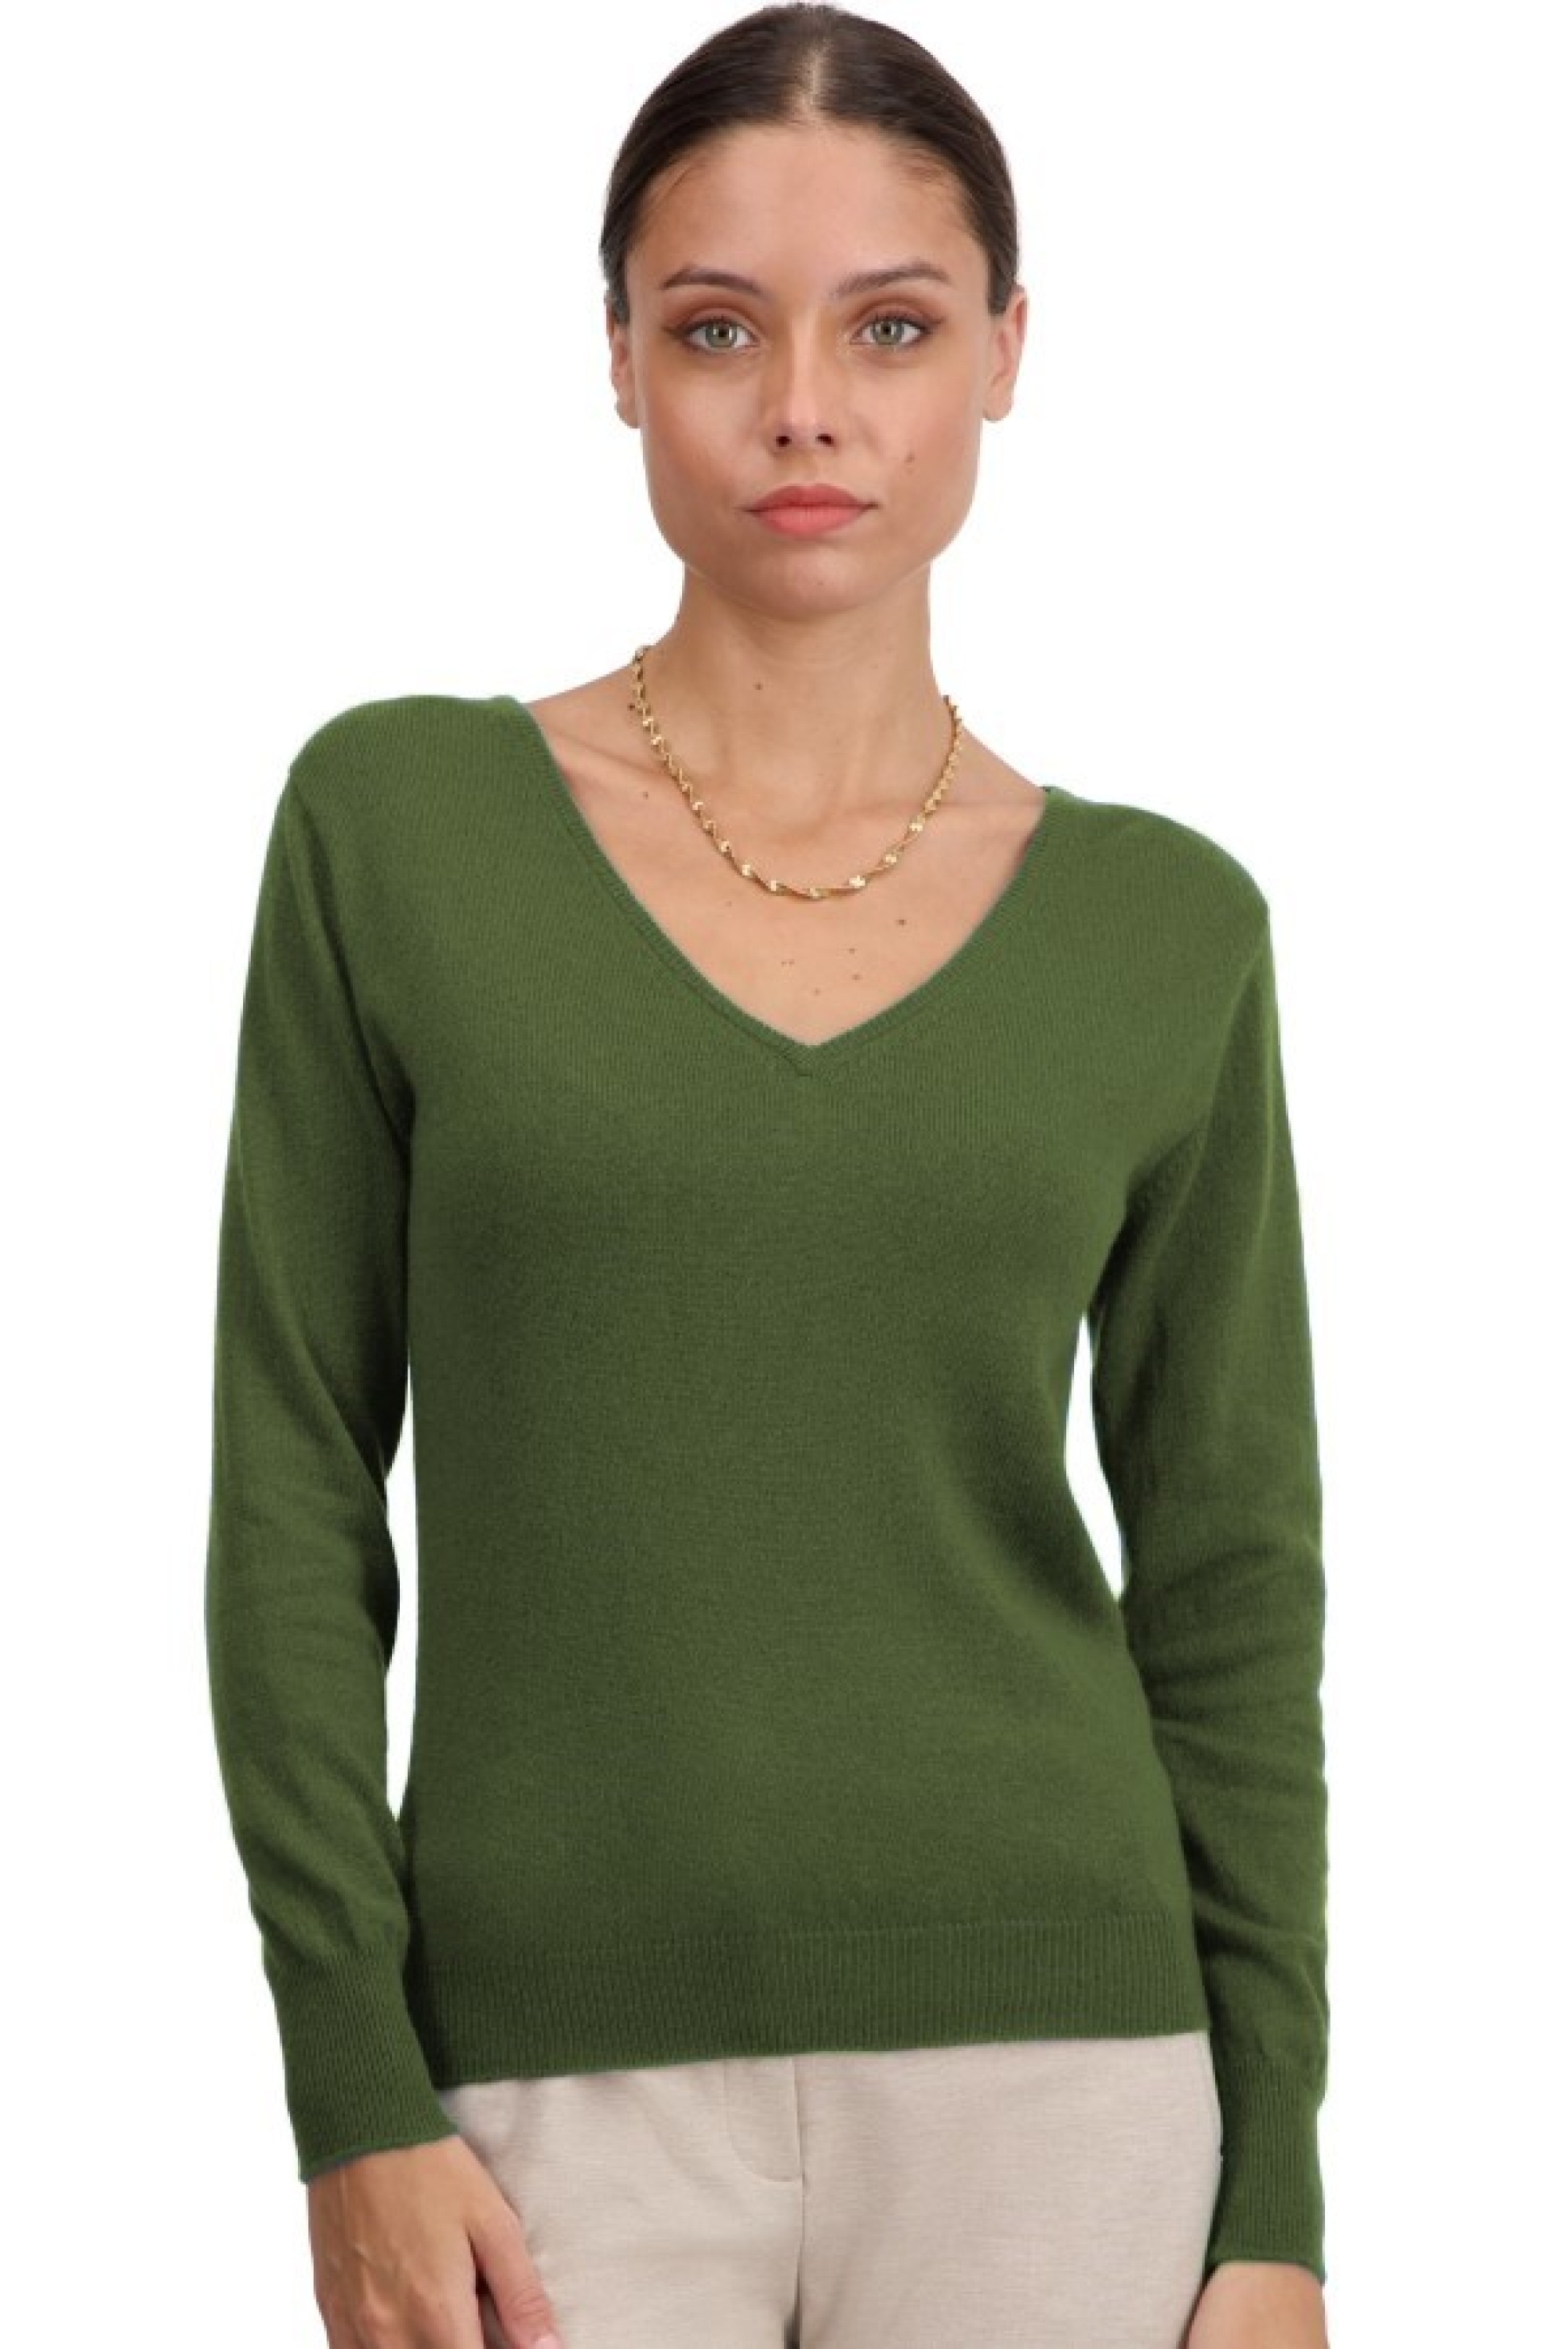 Cachemire pull femme collection printemps ete trieste first olive s